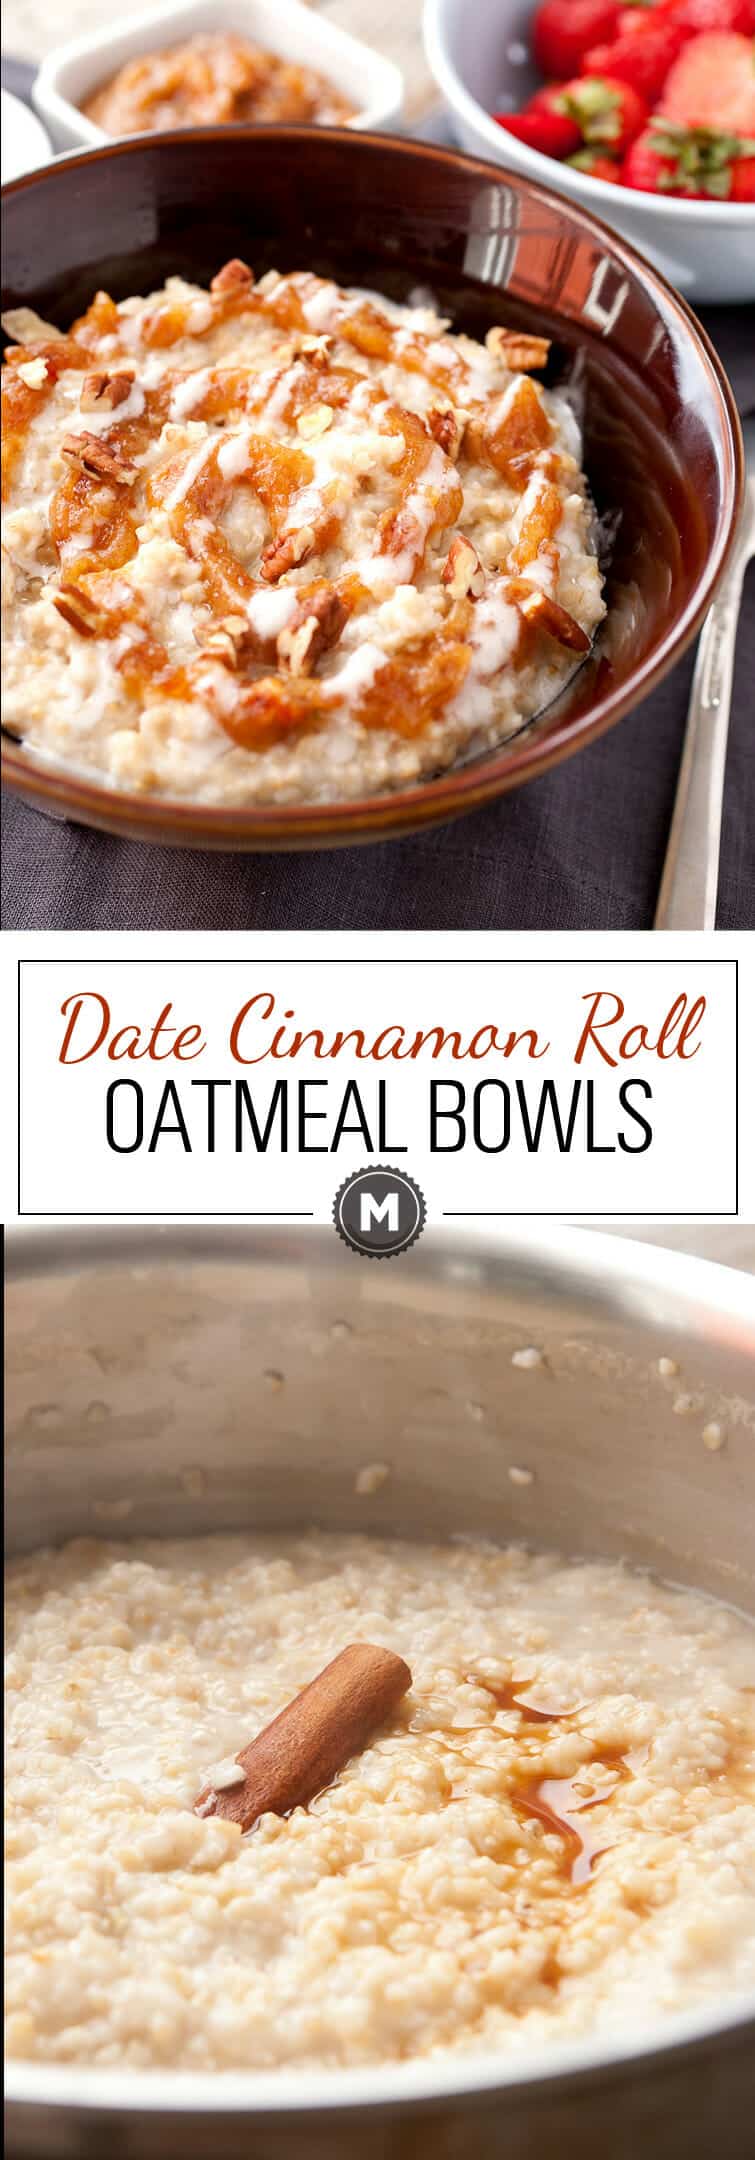 Date Cinnamon Roll Oatmeal Bowls: Steel-cut oatmeal slow-simmered with cinnamon and vanilla and topped with two perfect cinnamon roll toppings. Instead of just brown sugar though, I like to use dates! | macheesmo.com